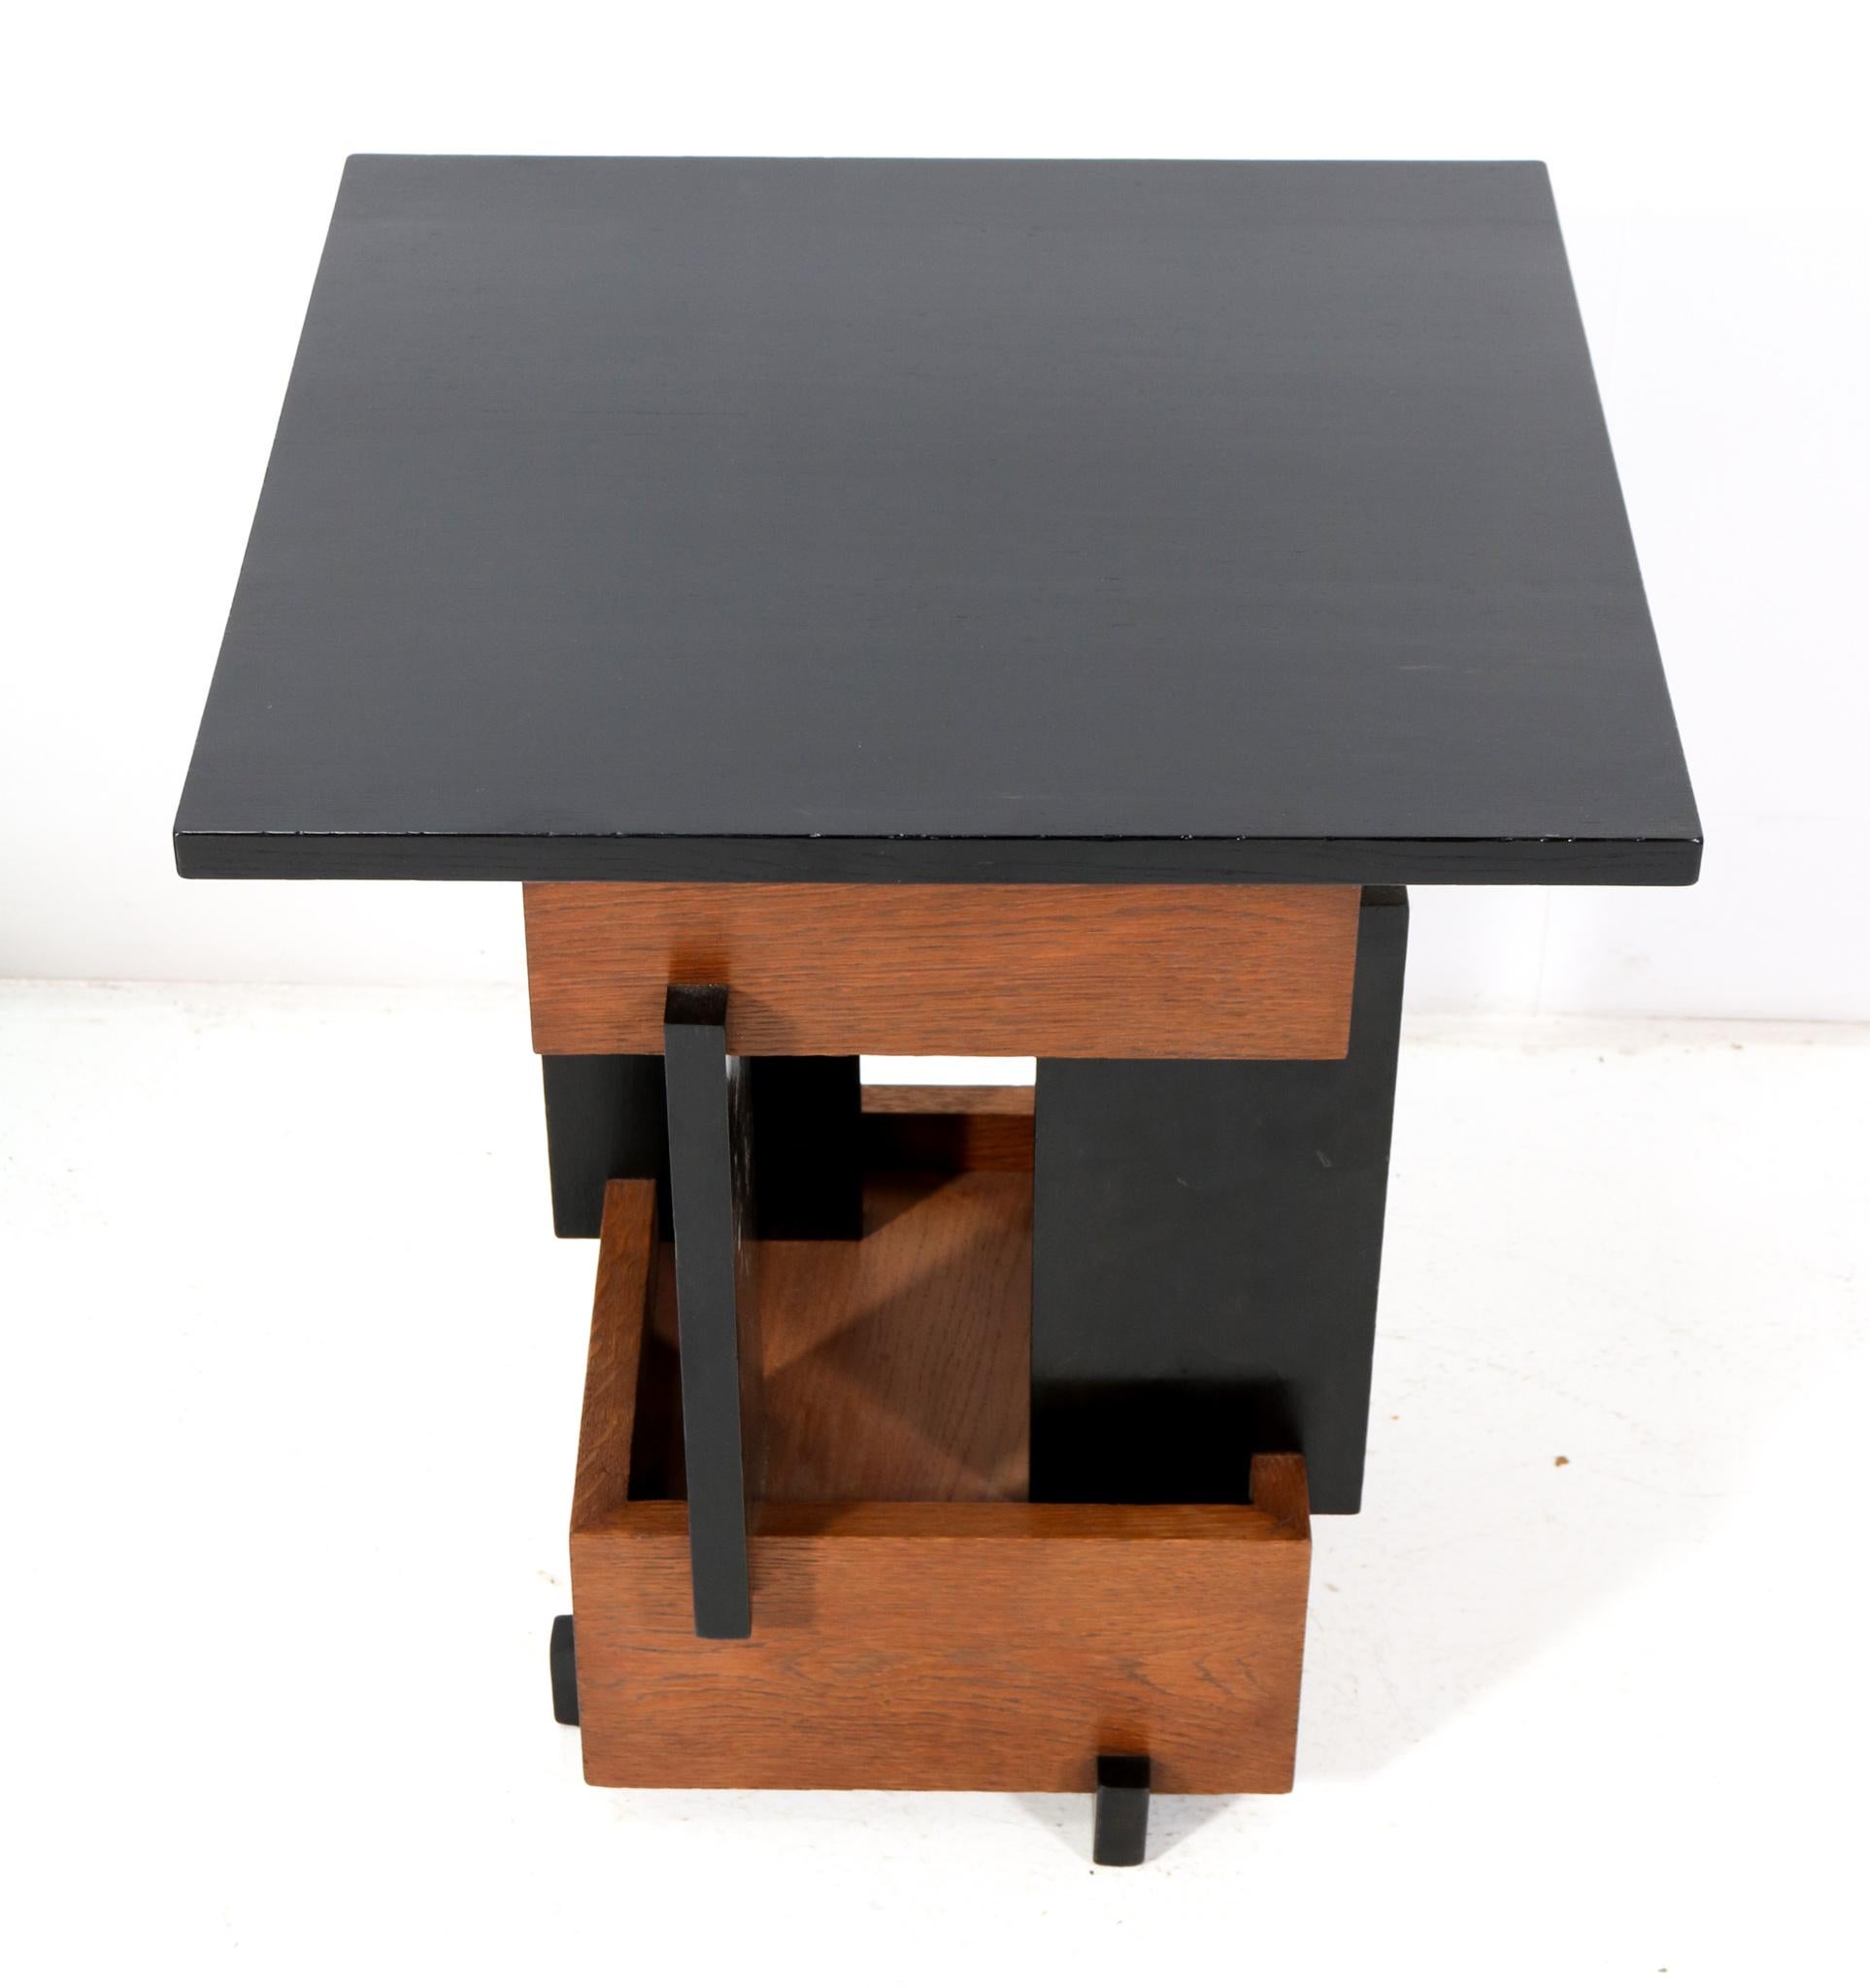 Oak Art Deco Modernist Side Table by Cor Alons, 1930s In Good Condition For Sale In Amsterdam, NL